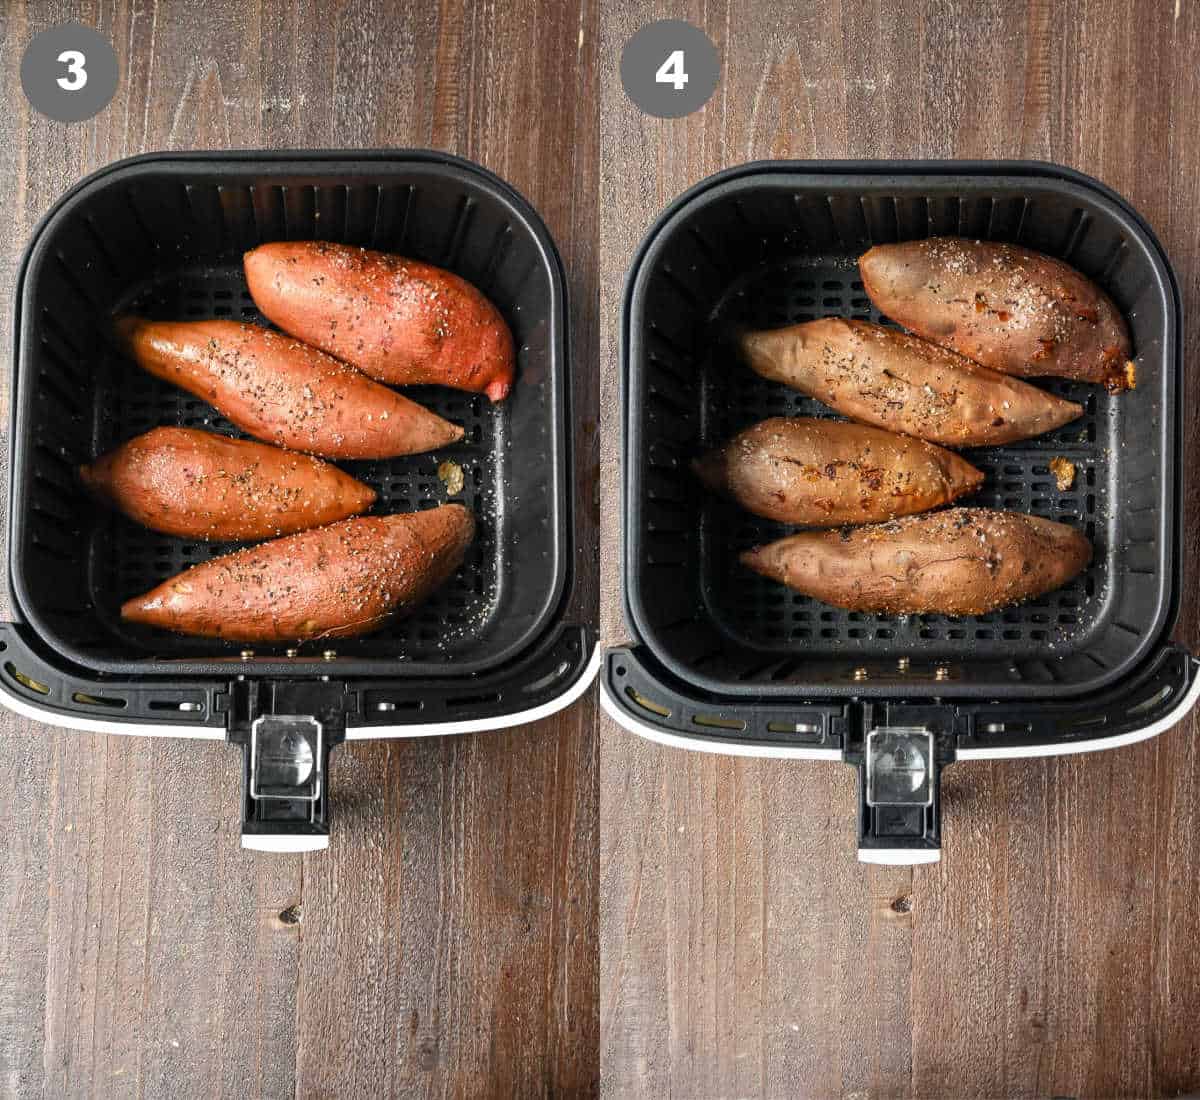 Steps 3 and 4 for making air fryer baked sweet potatoes.